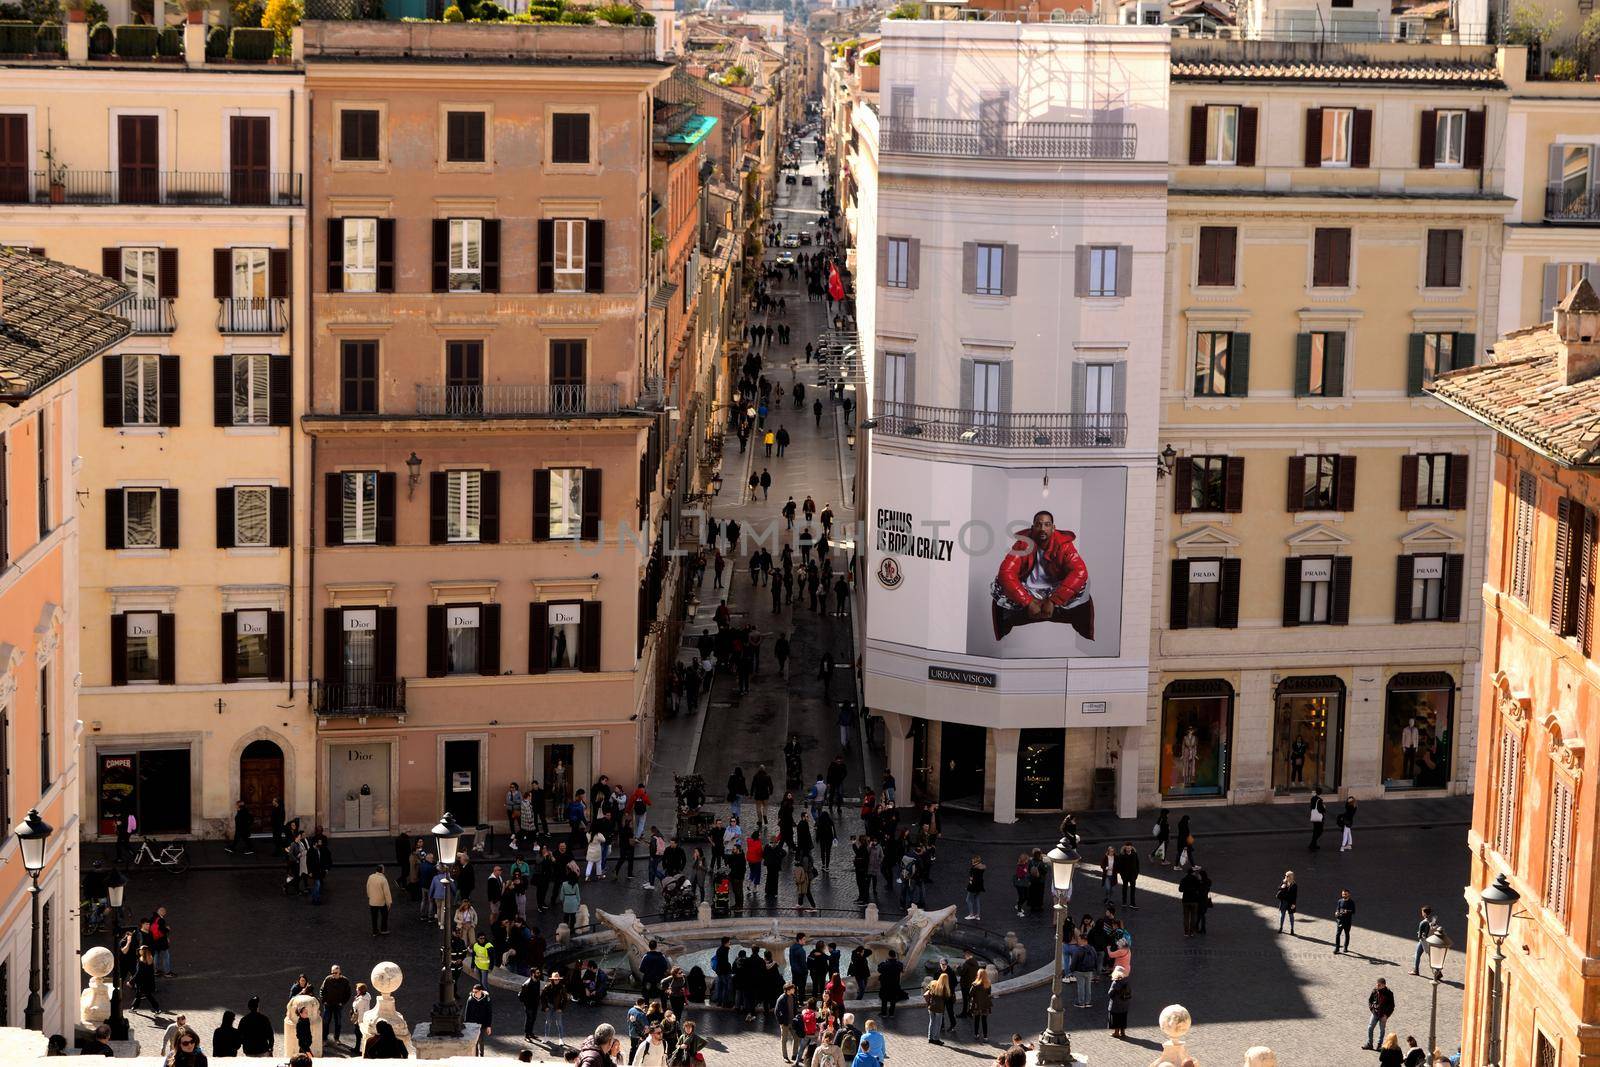 March 8th 2020, Rome, Italy: View of Piazza di Spagna with few tourists because of the coronavirus by silentstock639